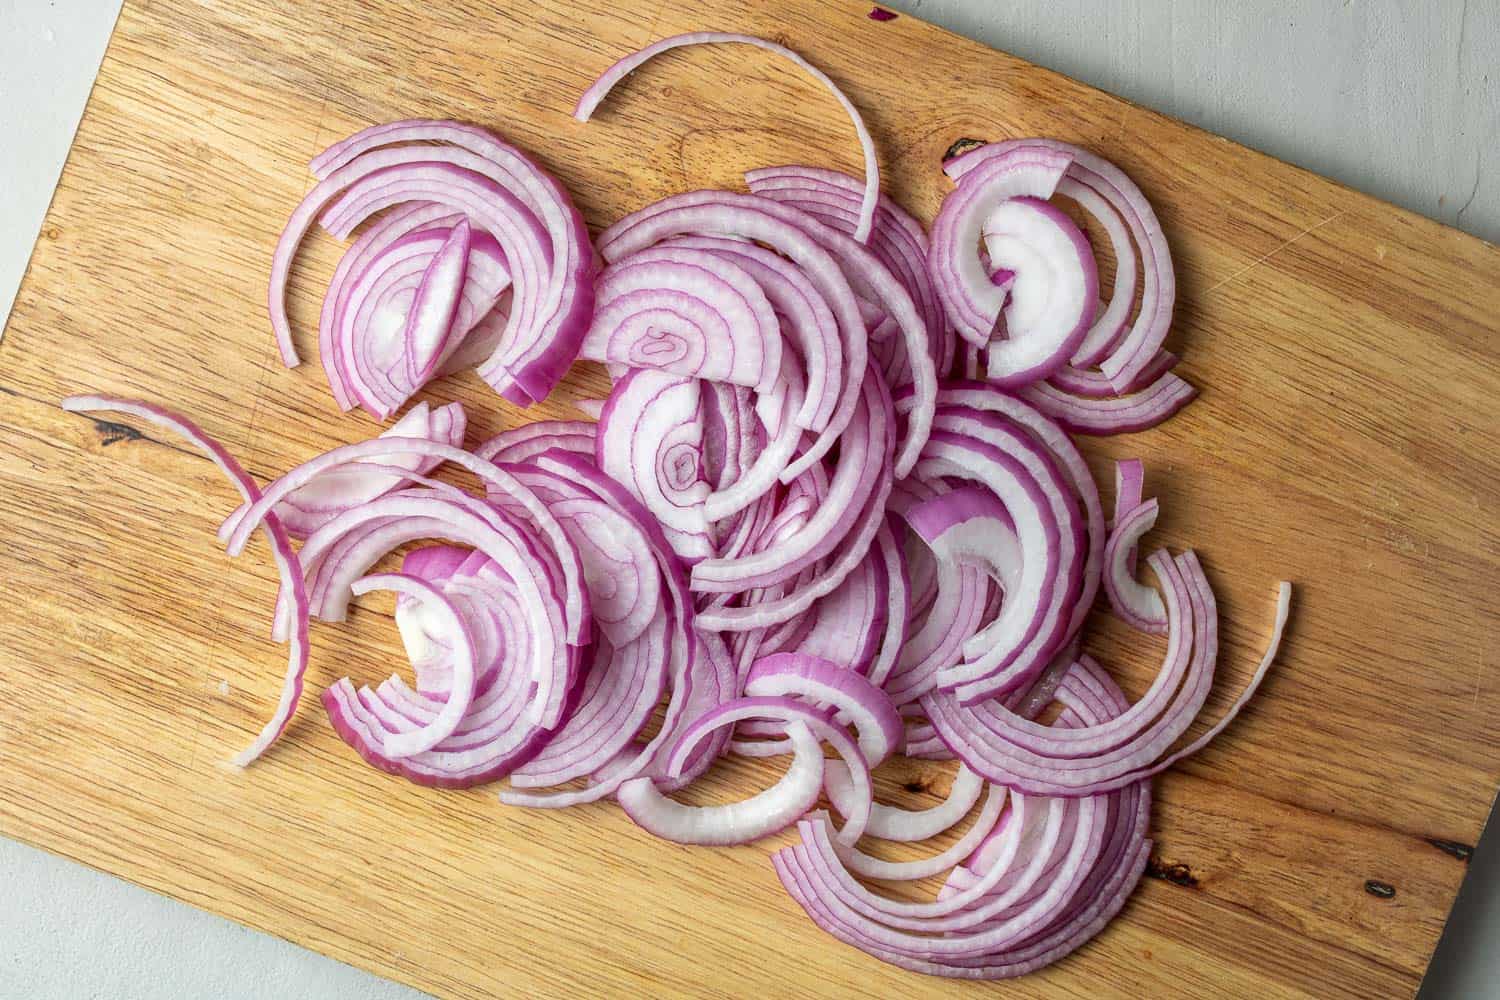 Sliced red onions on a wood or bamboo cutting board.